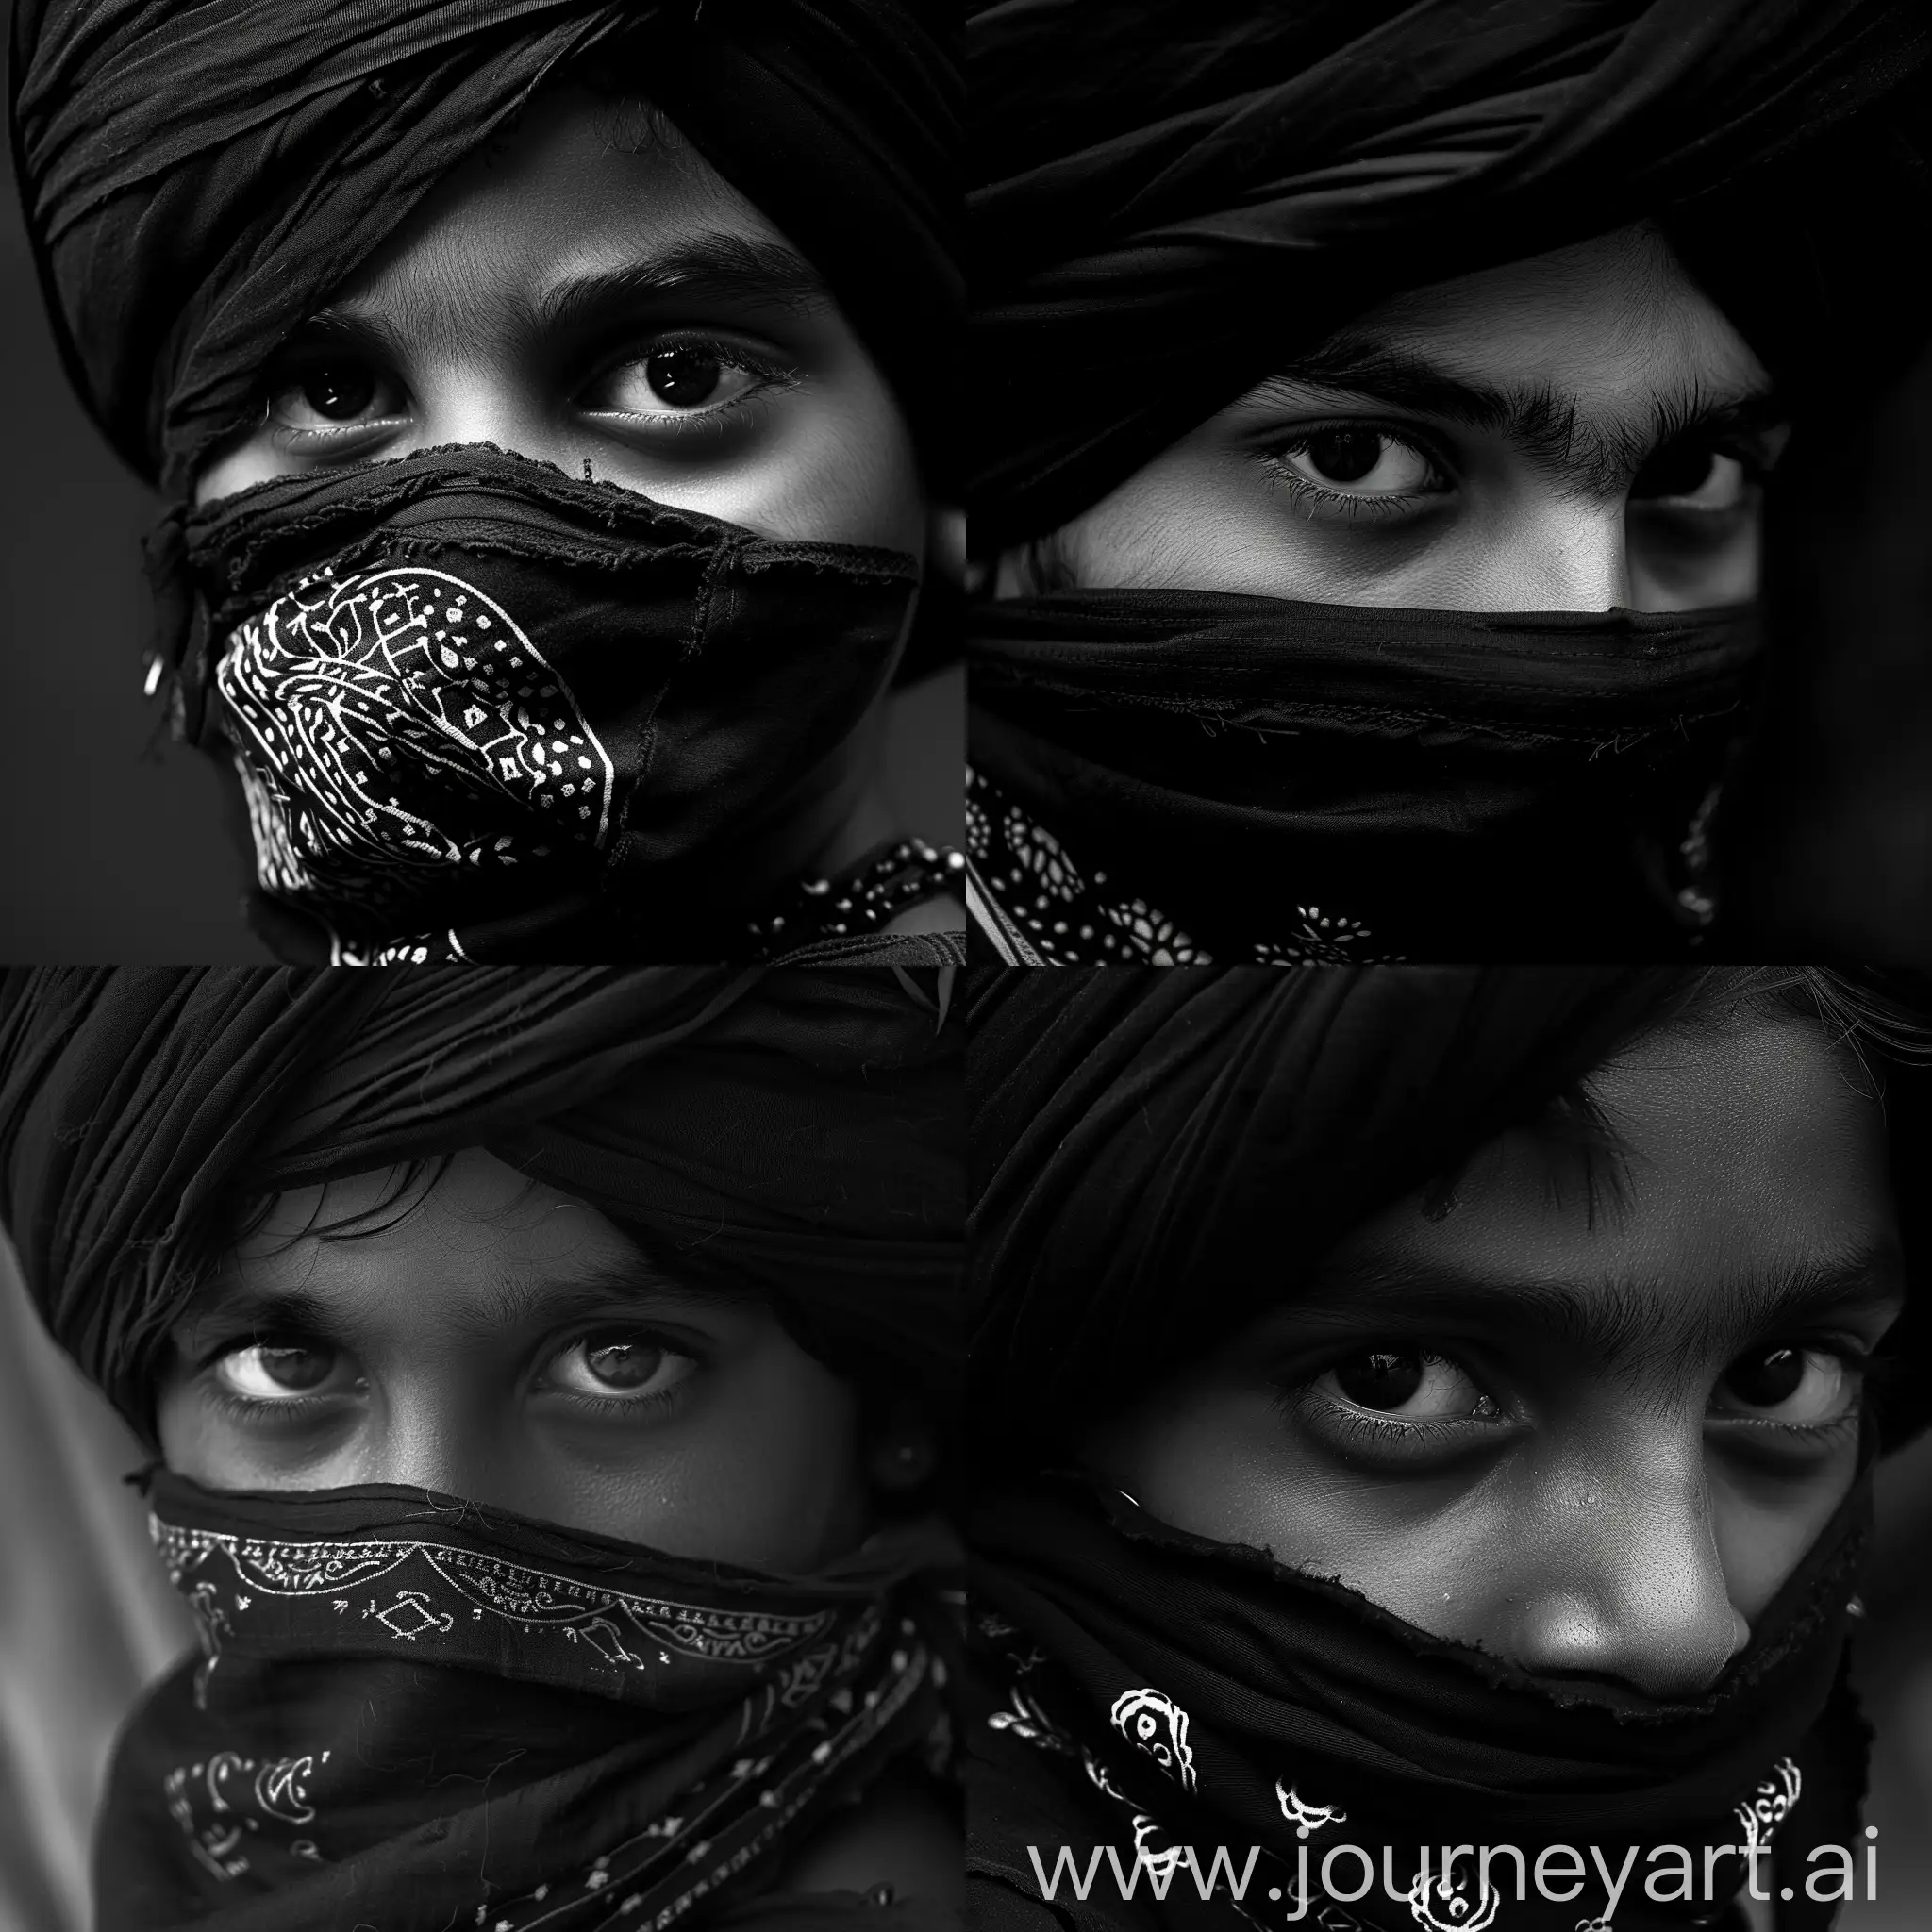 Young-Sikh-Boy-in-Black-Turban-and-Bandana-Professional-Black-and-White-CloseUp-Portrait